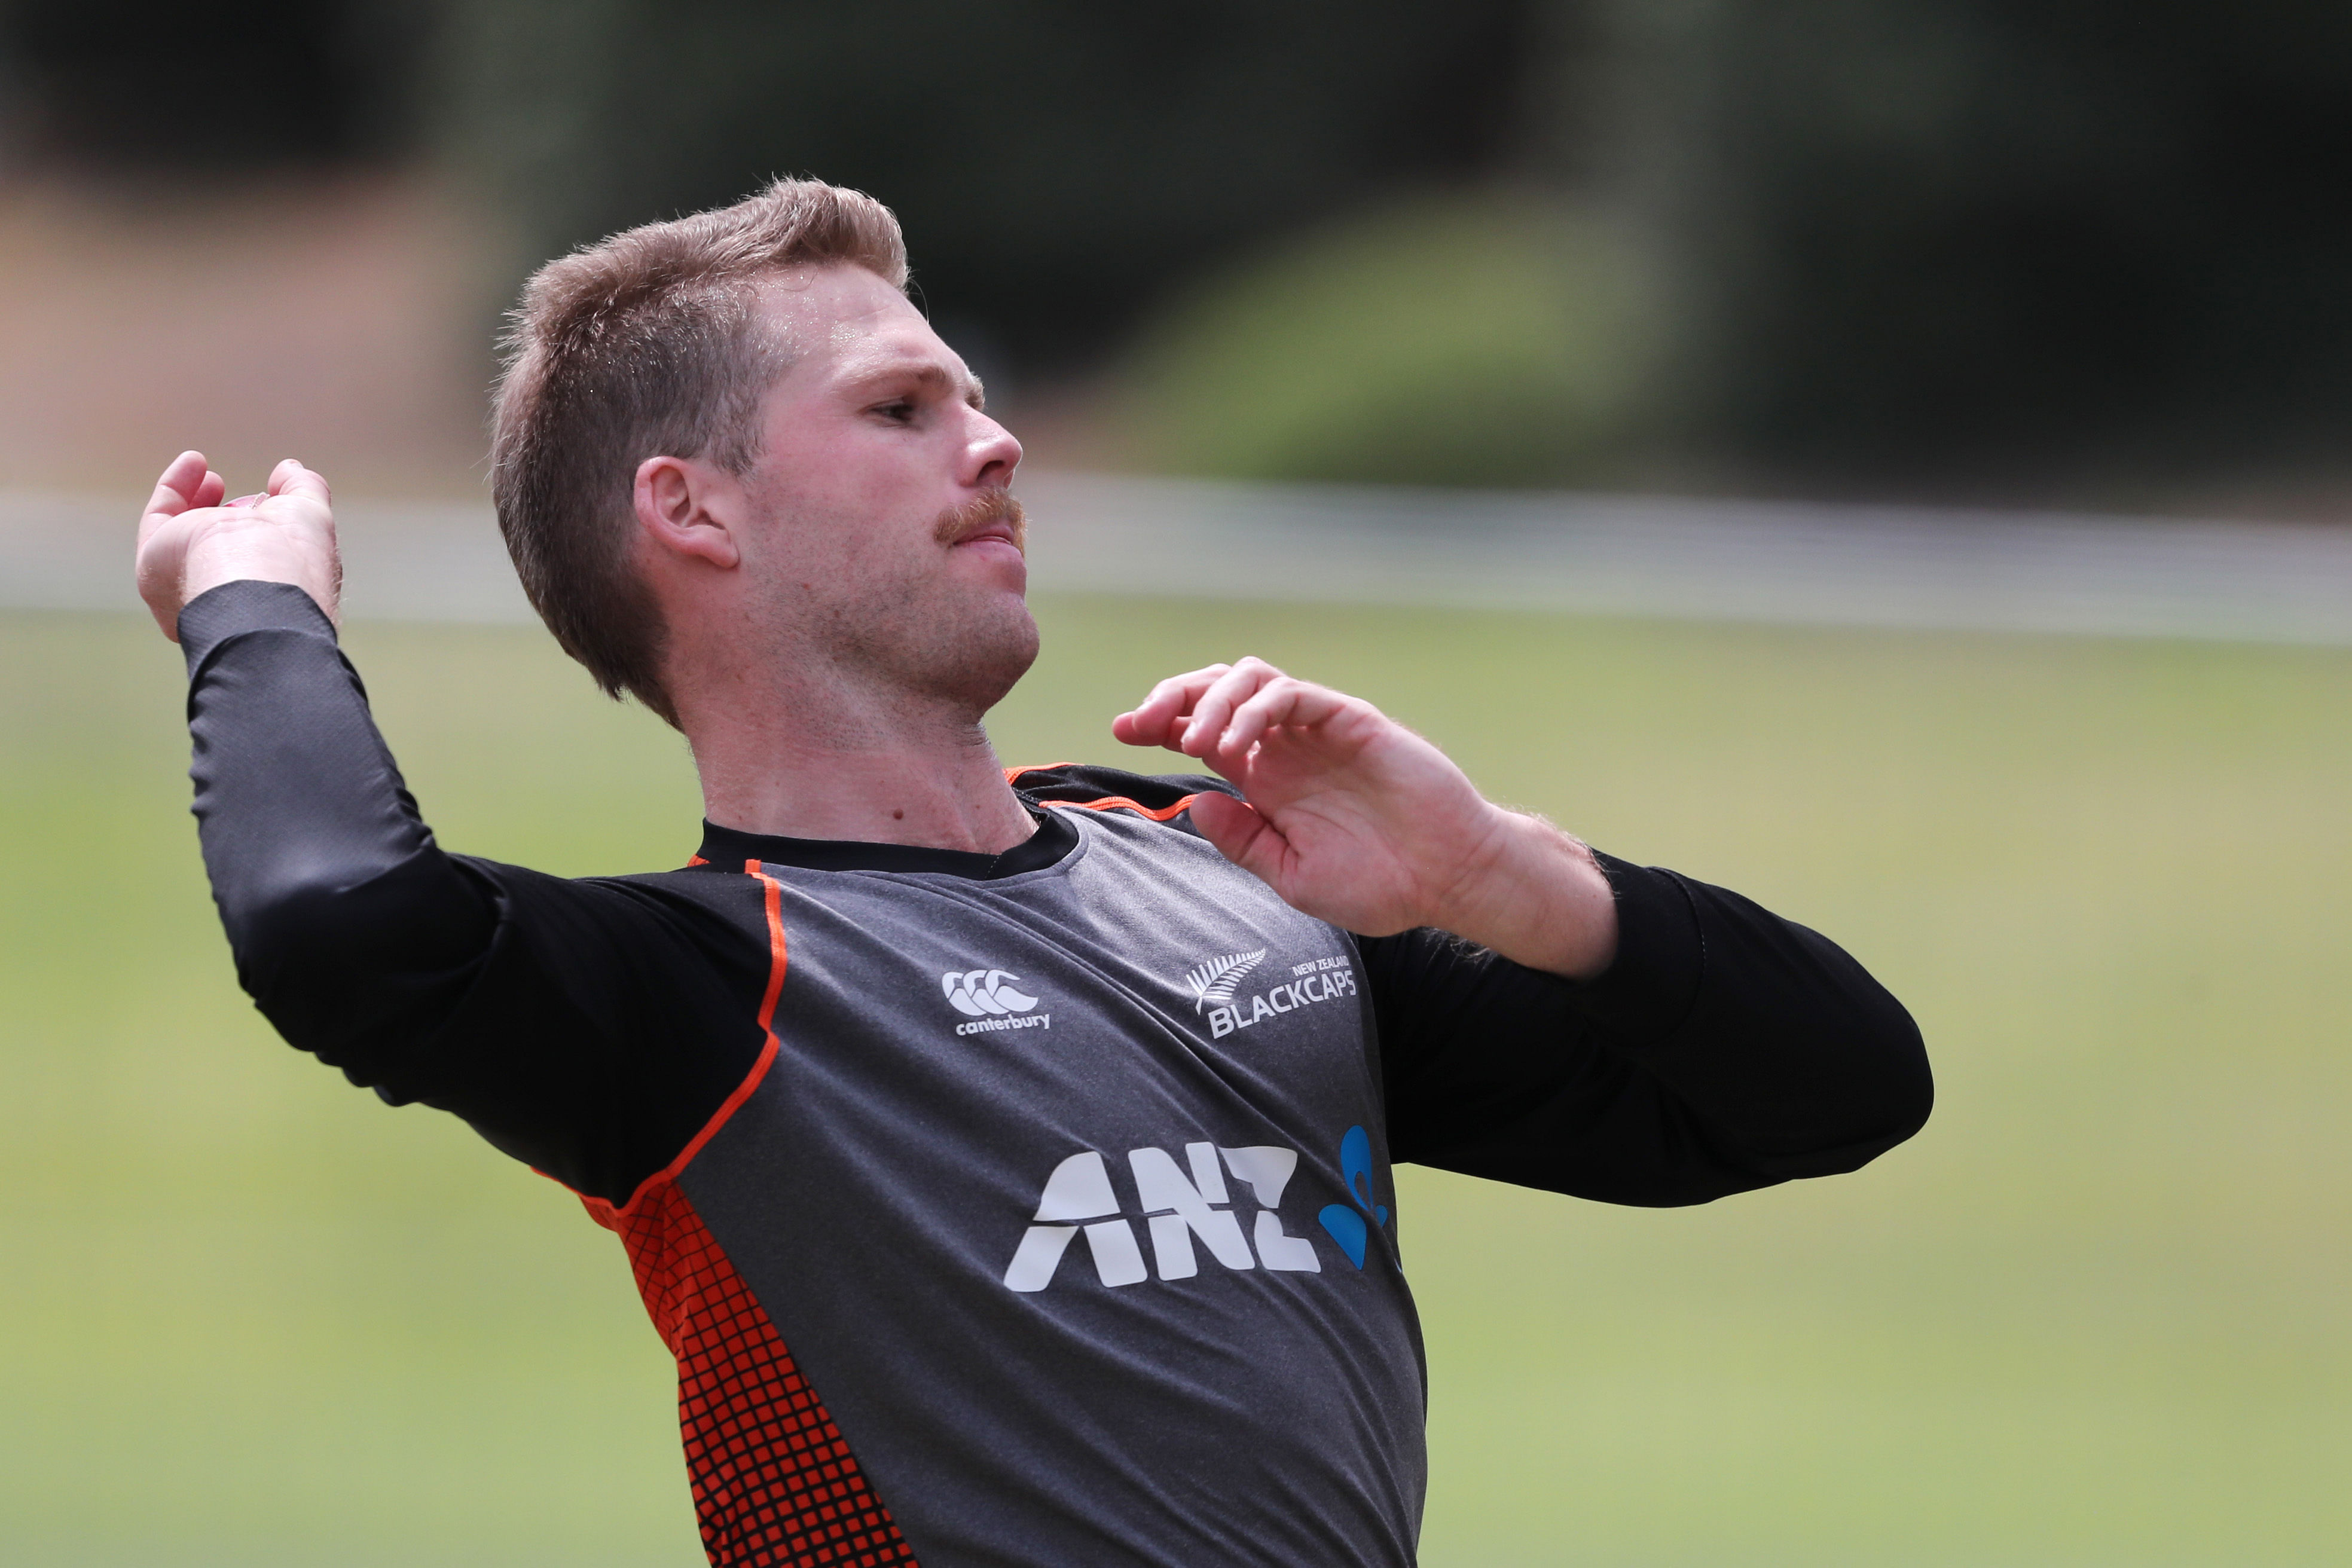 New Zealand Lockie Ferguson bowls during a training session ahead of the first Test match between New Zealand and England played at Bay Oval in Mount Maunganui. (AFP Photo)